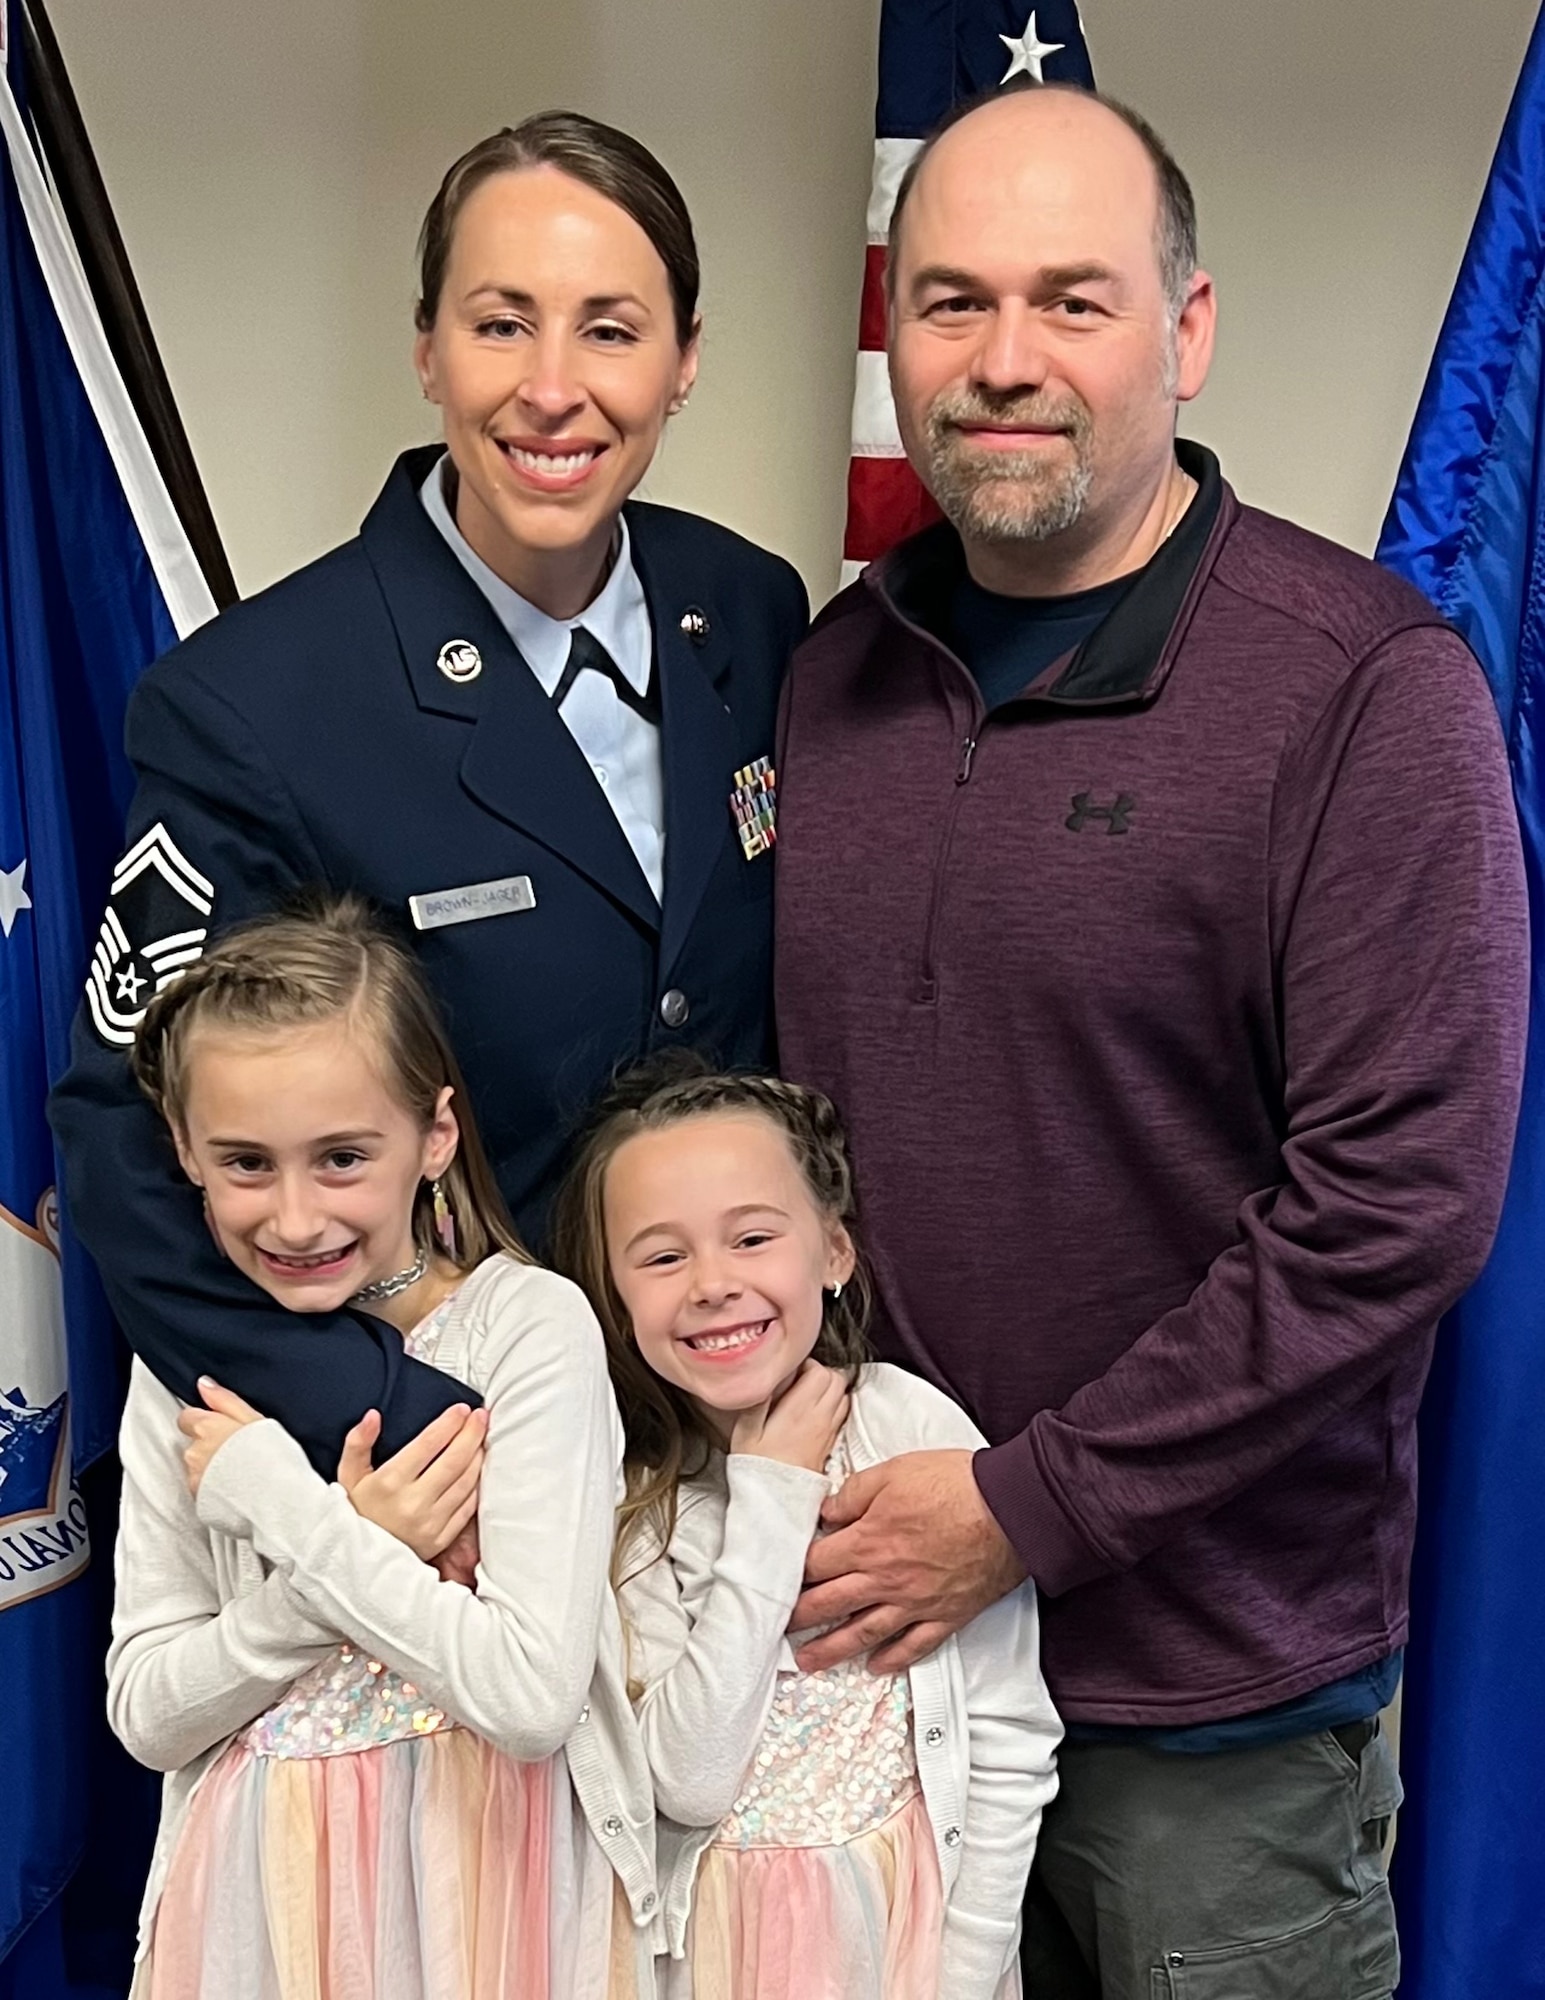 U.S. Air Force Senior Master Sgt. Sarah Brown-Jager poses for a photo with her family in St. Paul, Minn., Feb. 15, 2022.